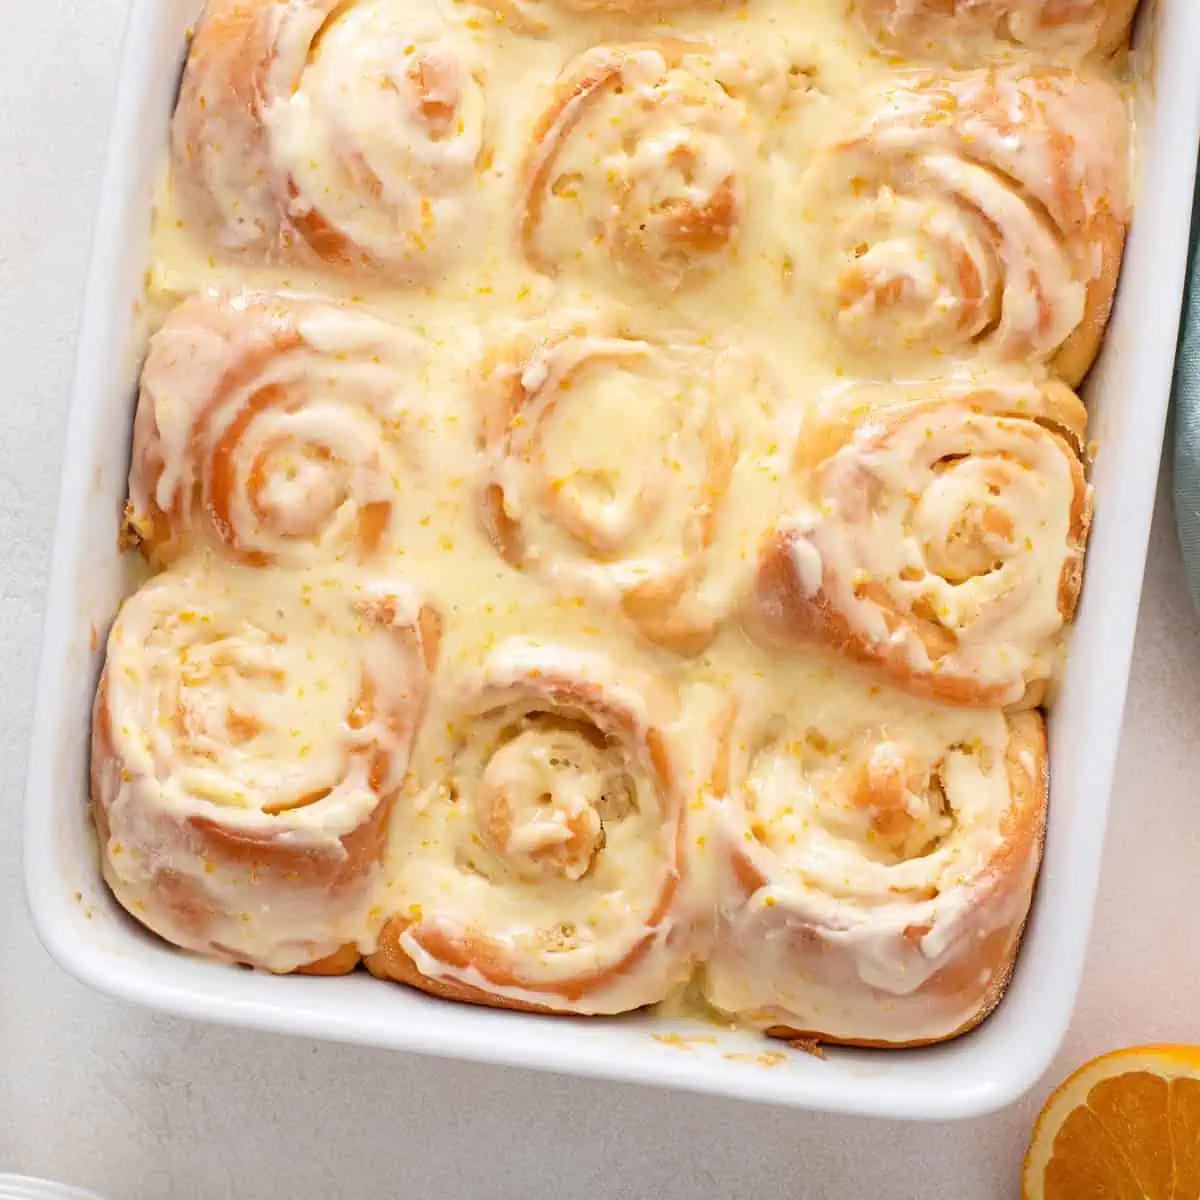 Frosted Orange Rolls